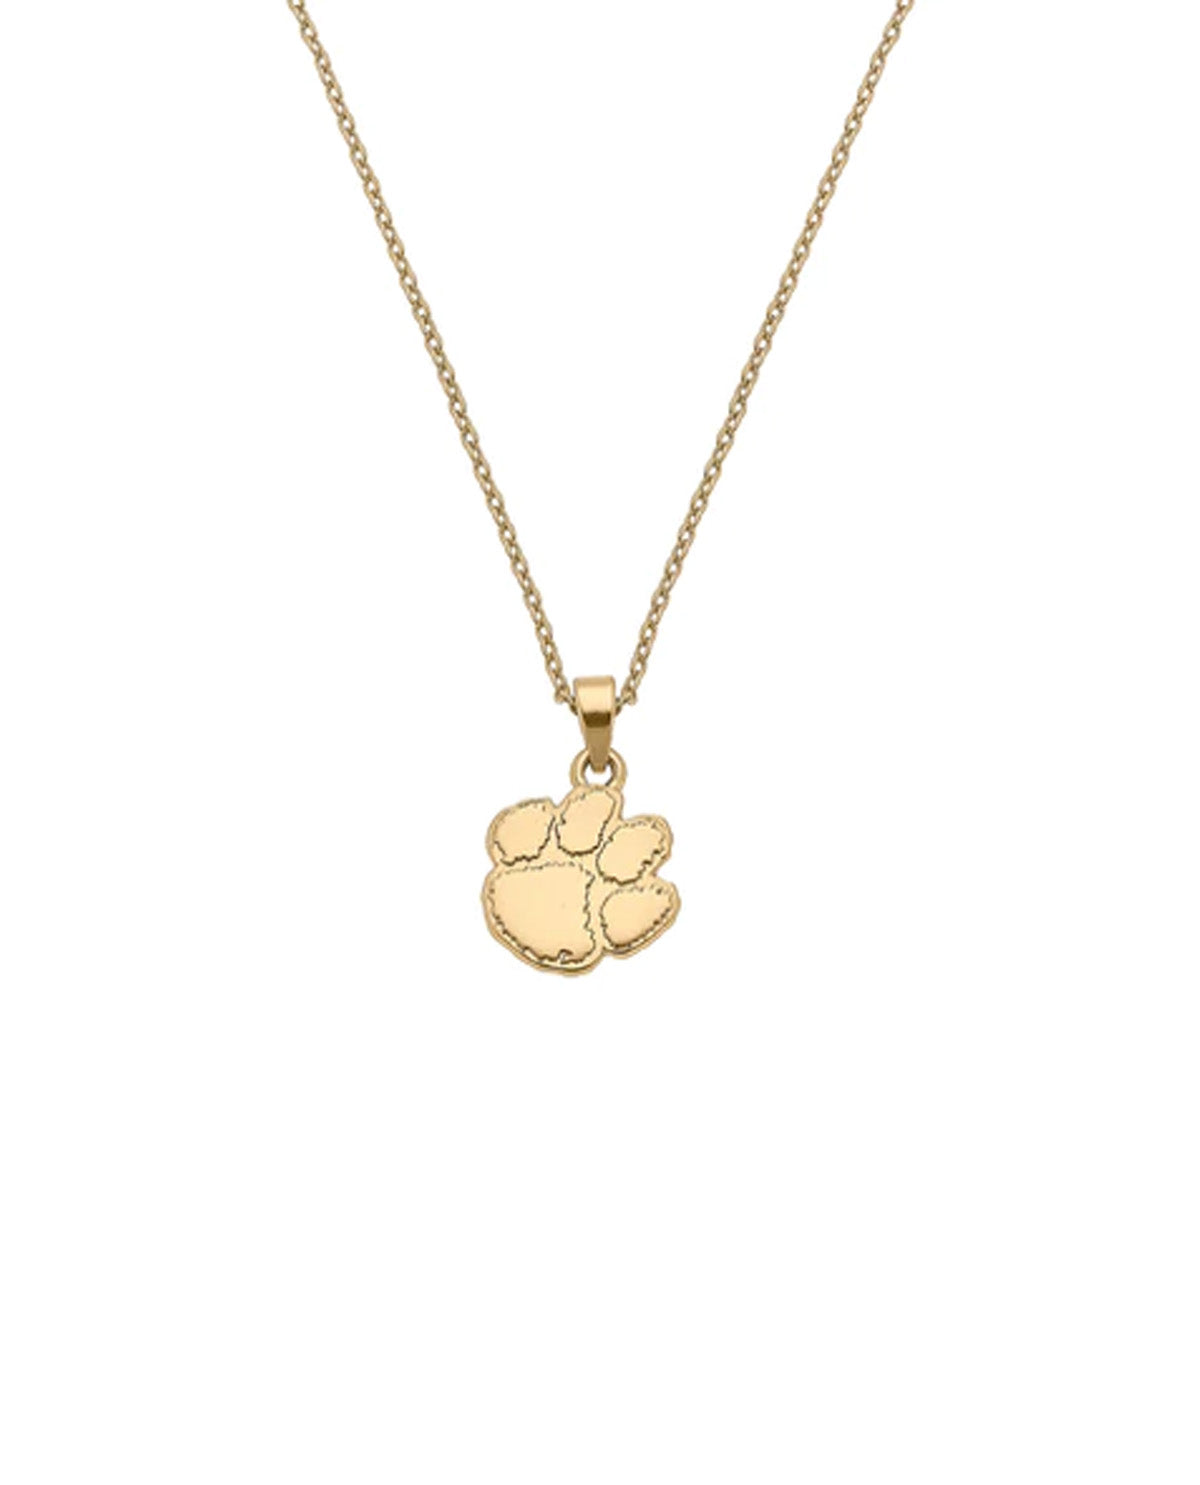 Clemson Tigers 24K Gold Plated Pendant Necklace